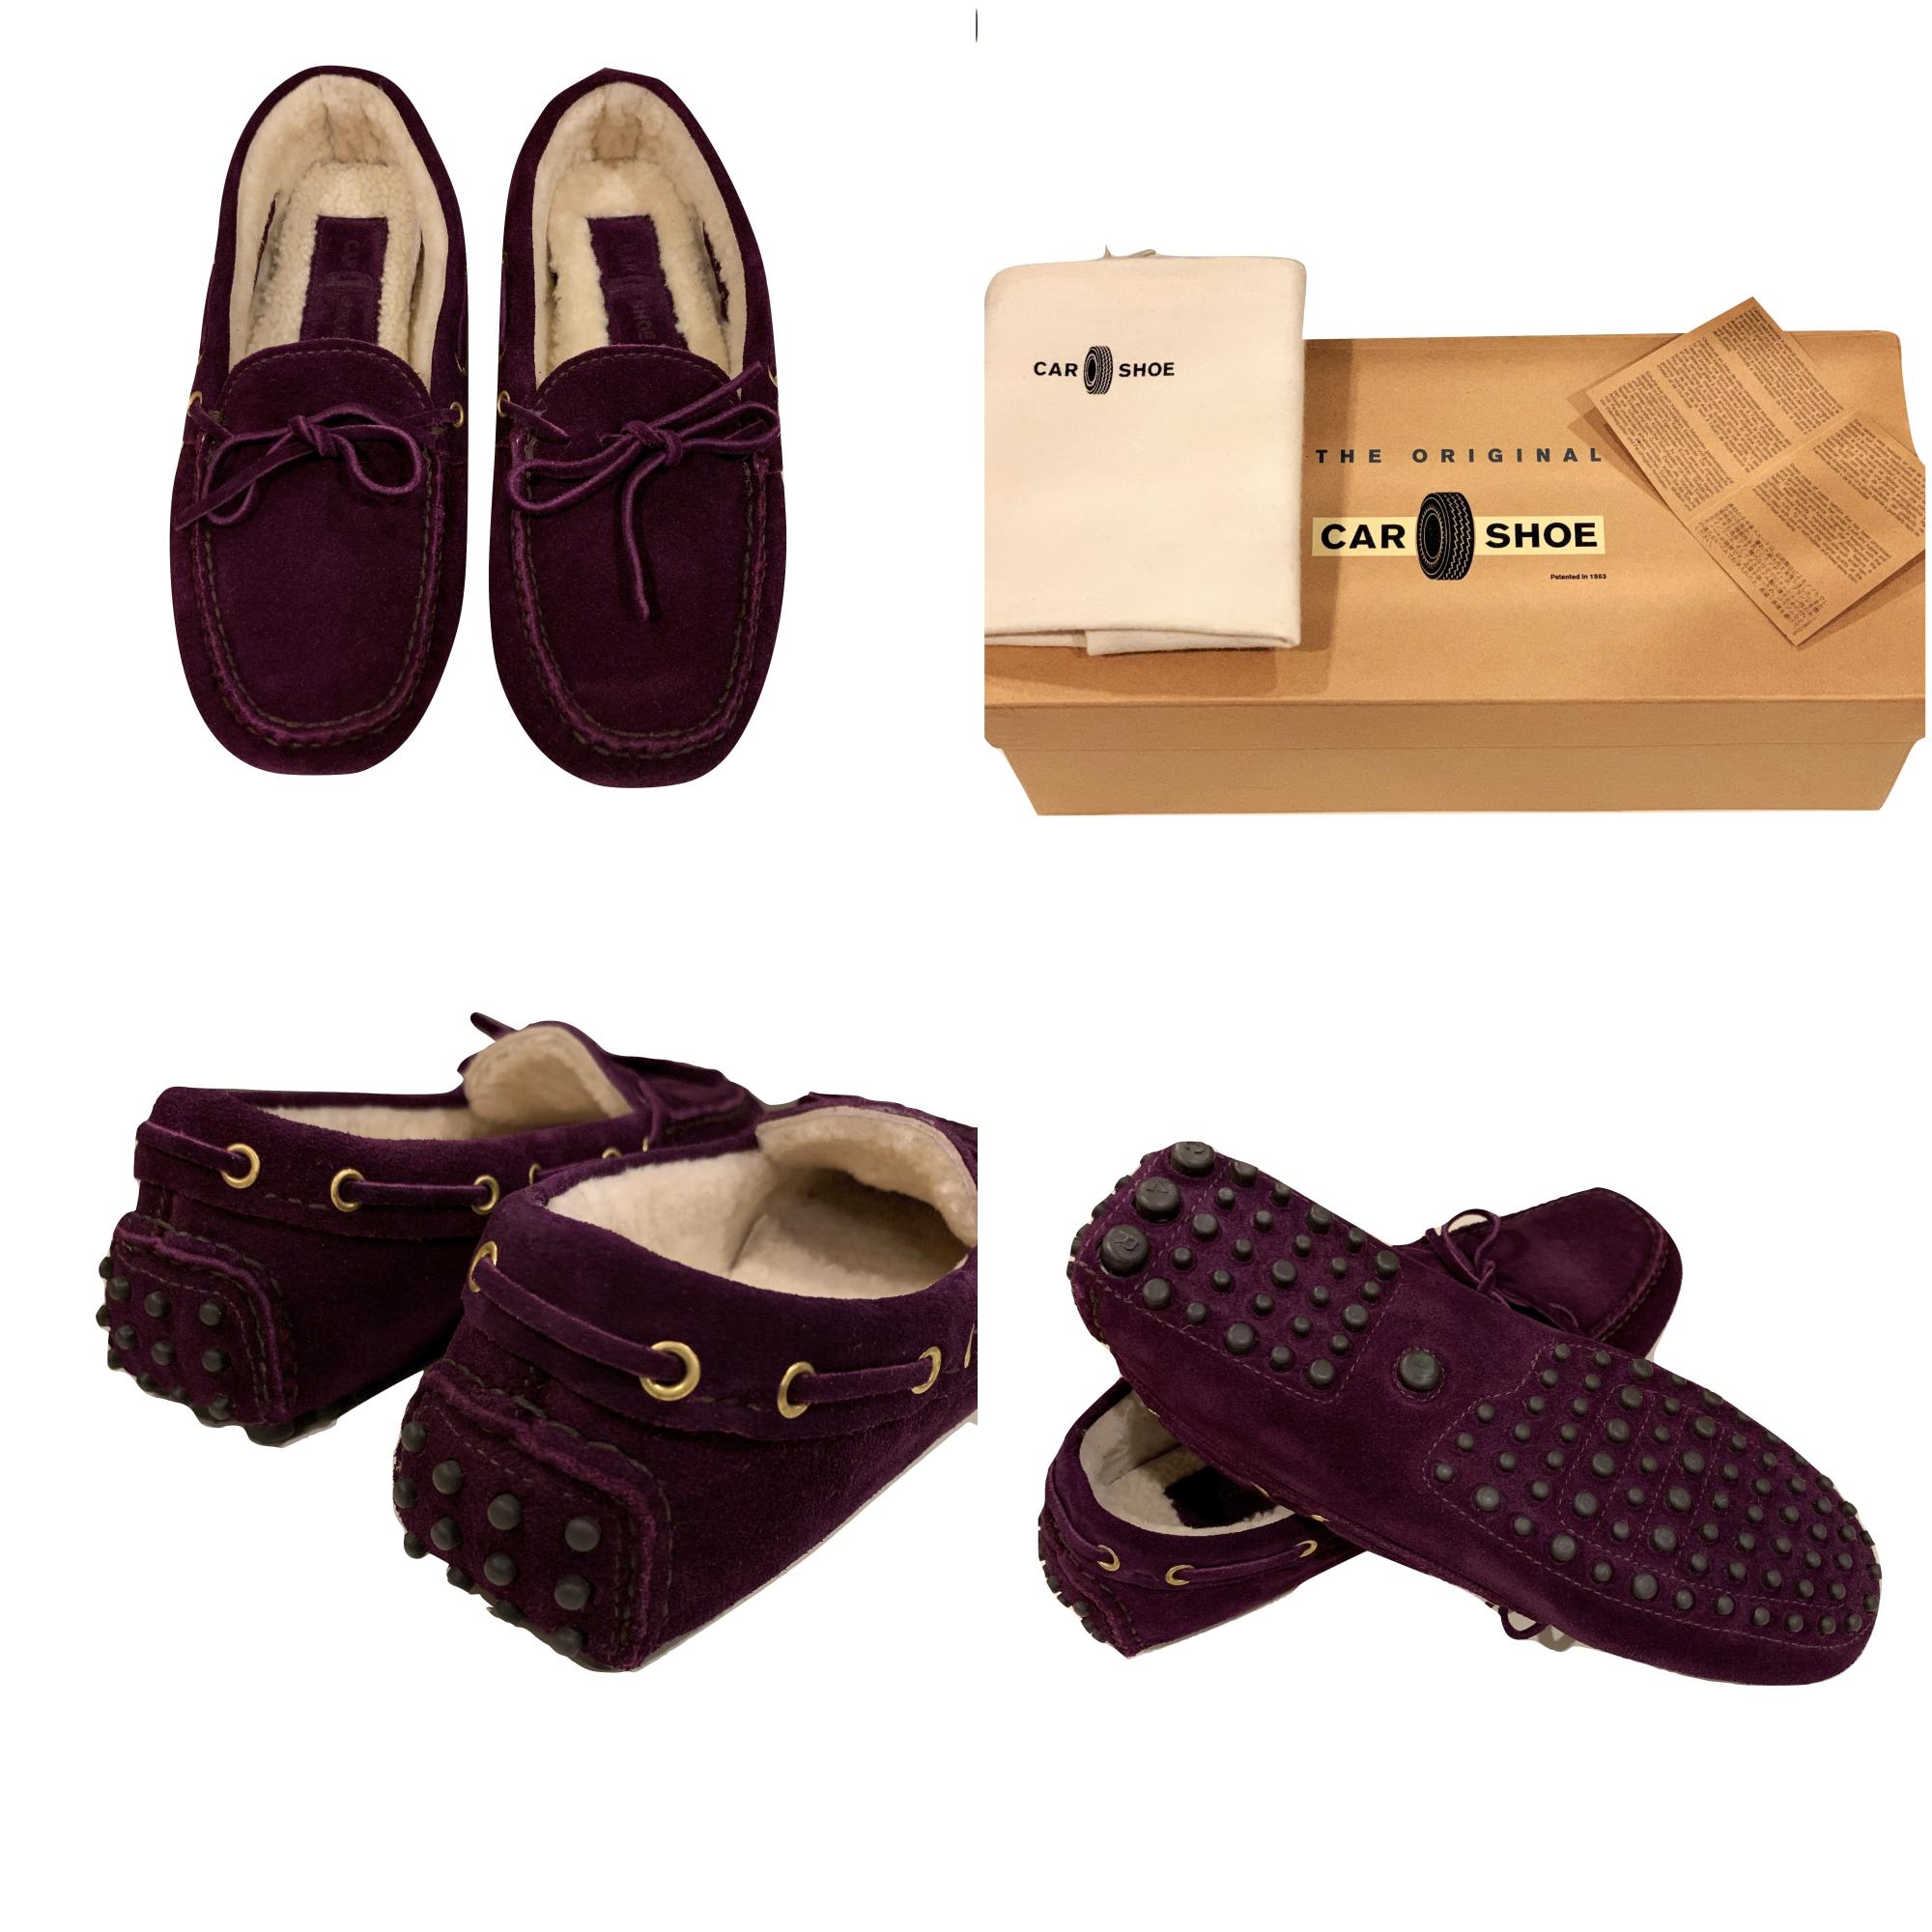 The Original Car Shoe by Prada

Brand New
* Deep Plum
* Suede
* Shearling Lining
* Gold Hardware
* Bow Toe
* Flat Heel
* Rubber Bumper Sole
* With Box & Dust Cover